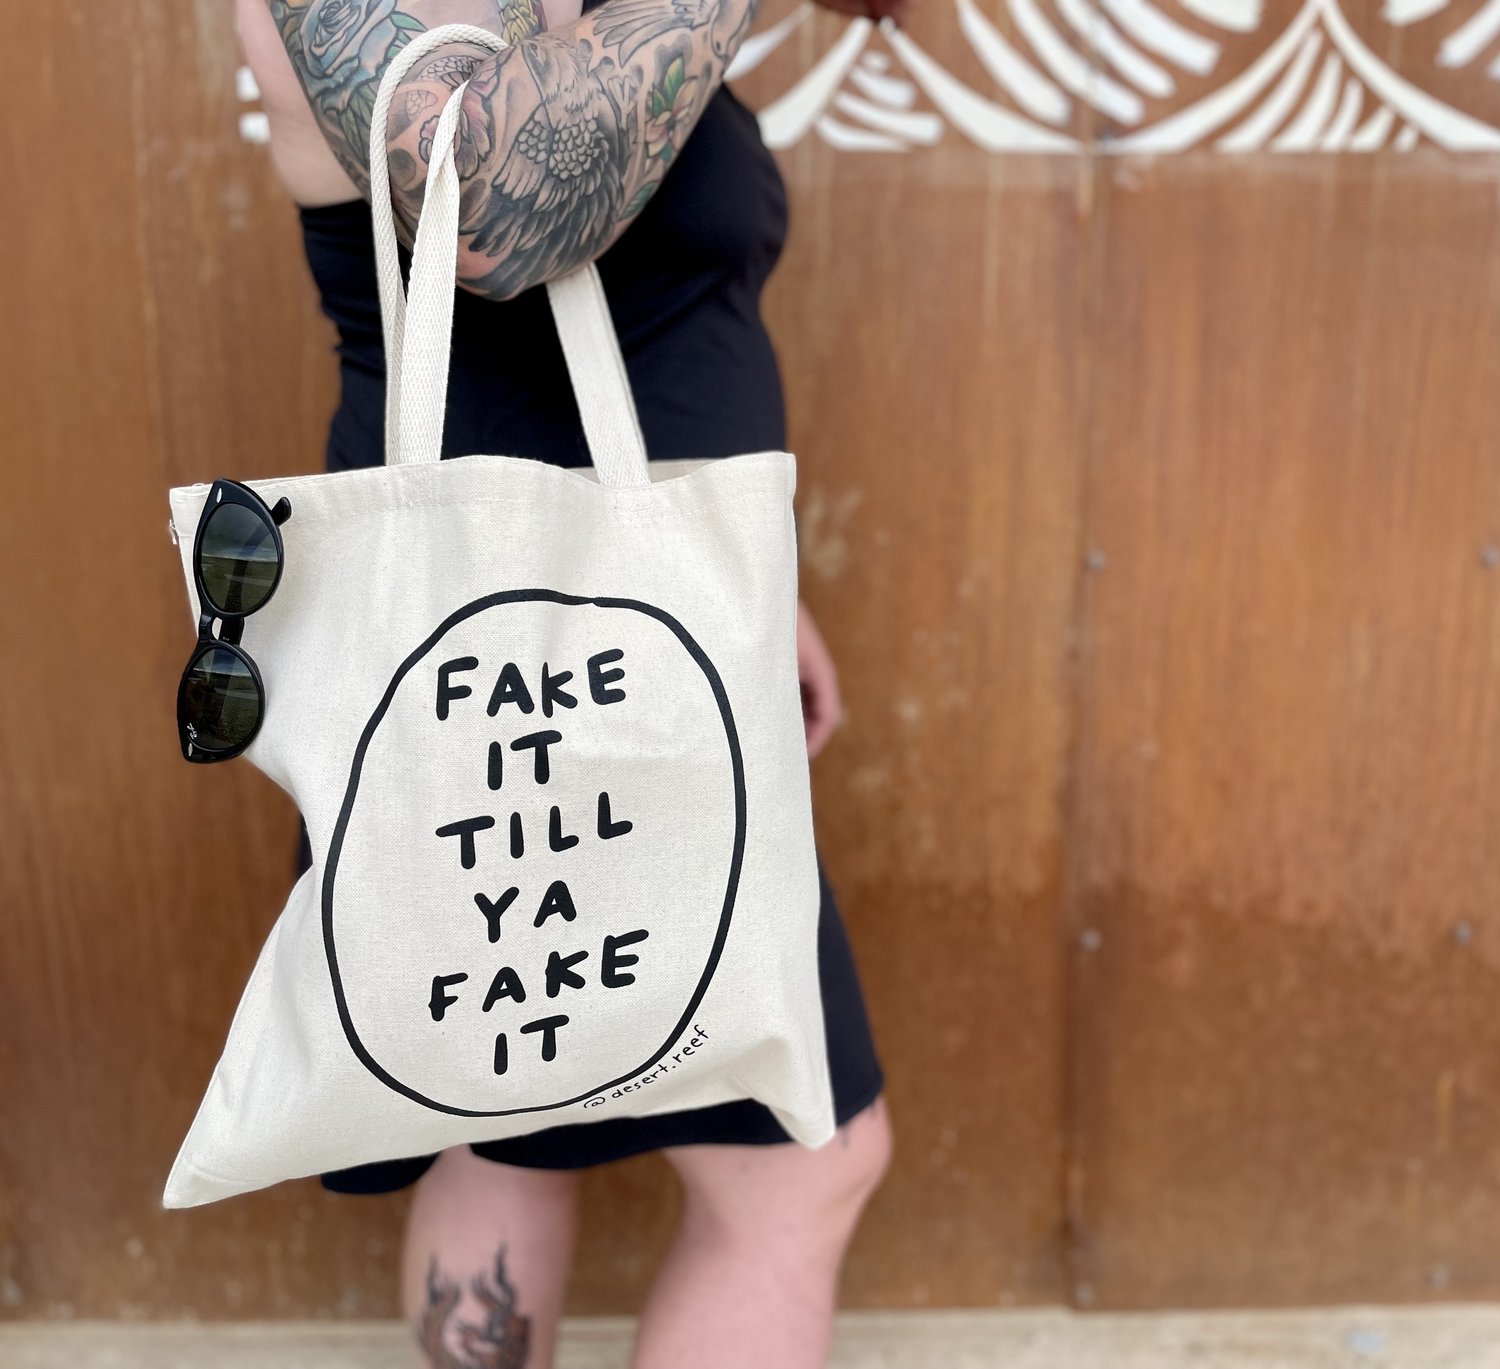 Want to Buy a Fake Bag? Stay Off The Street & Try This Instead